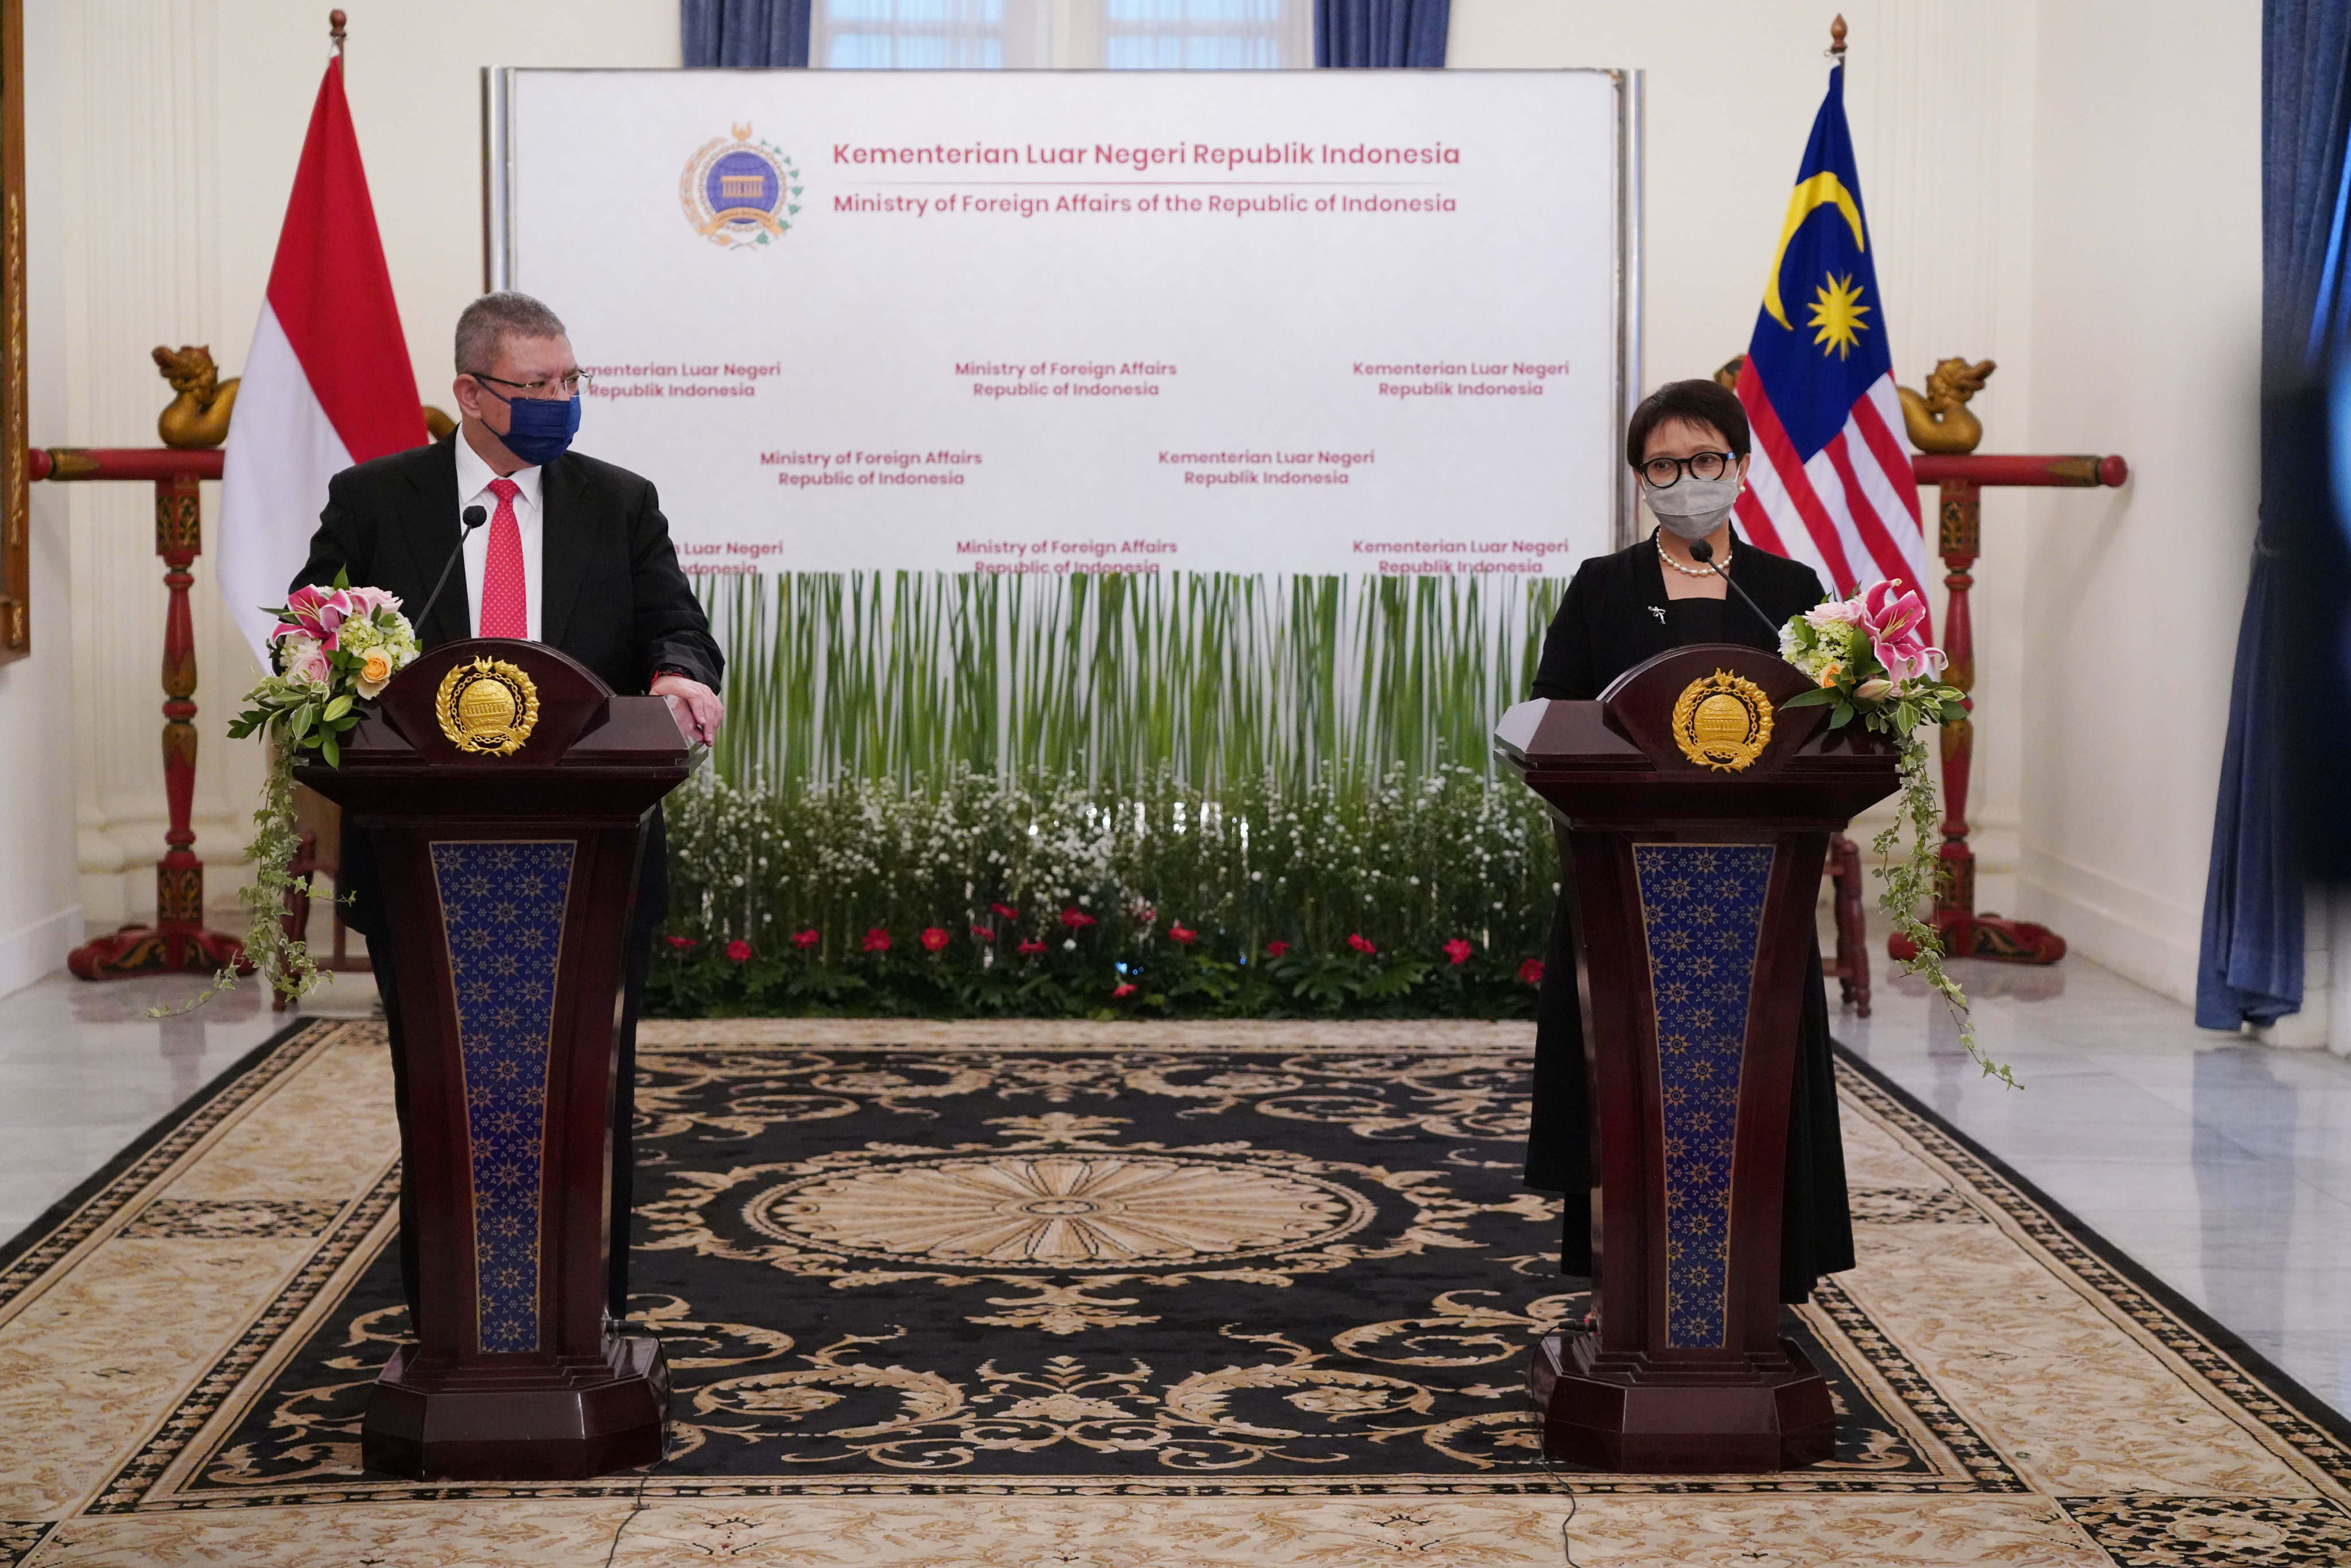 A meeting between Malaysia’s Foreign Minister Saifuddin Abdullah and his Indonesian counterpart Retno Marsudi in October 2021. Photo: AP